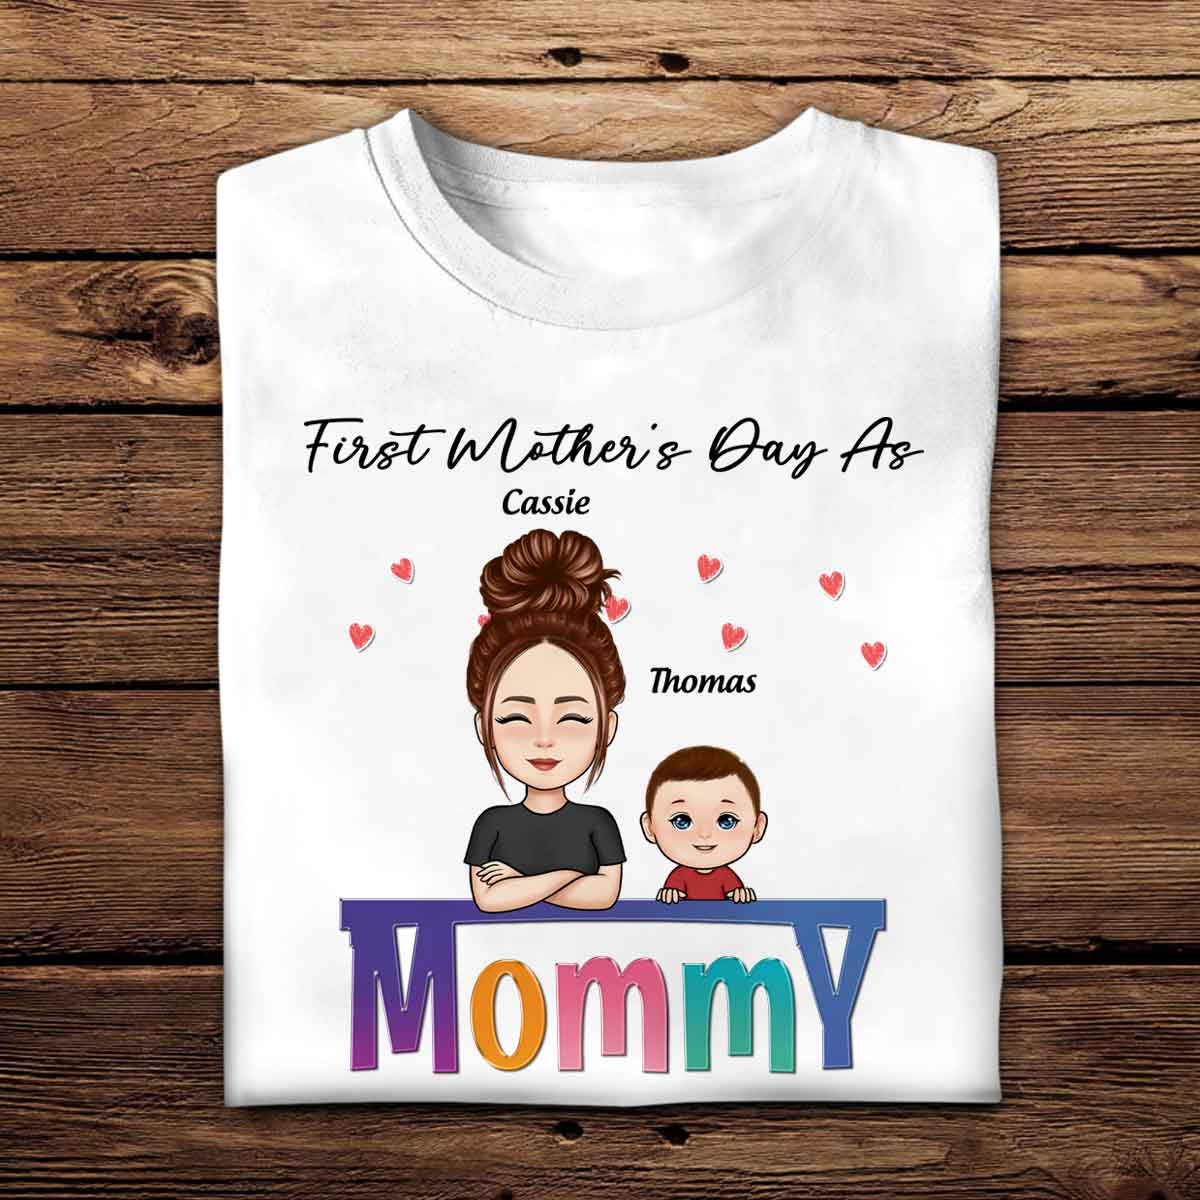 First Mother's Day As Mommy - Personalized Shirt - Gift For New Mom, First Mother's Day